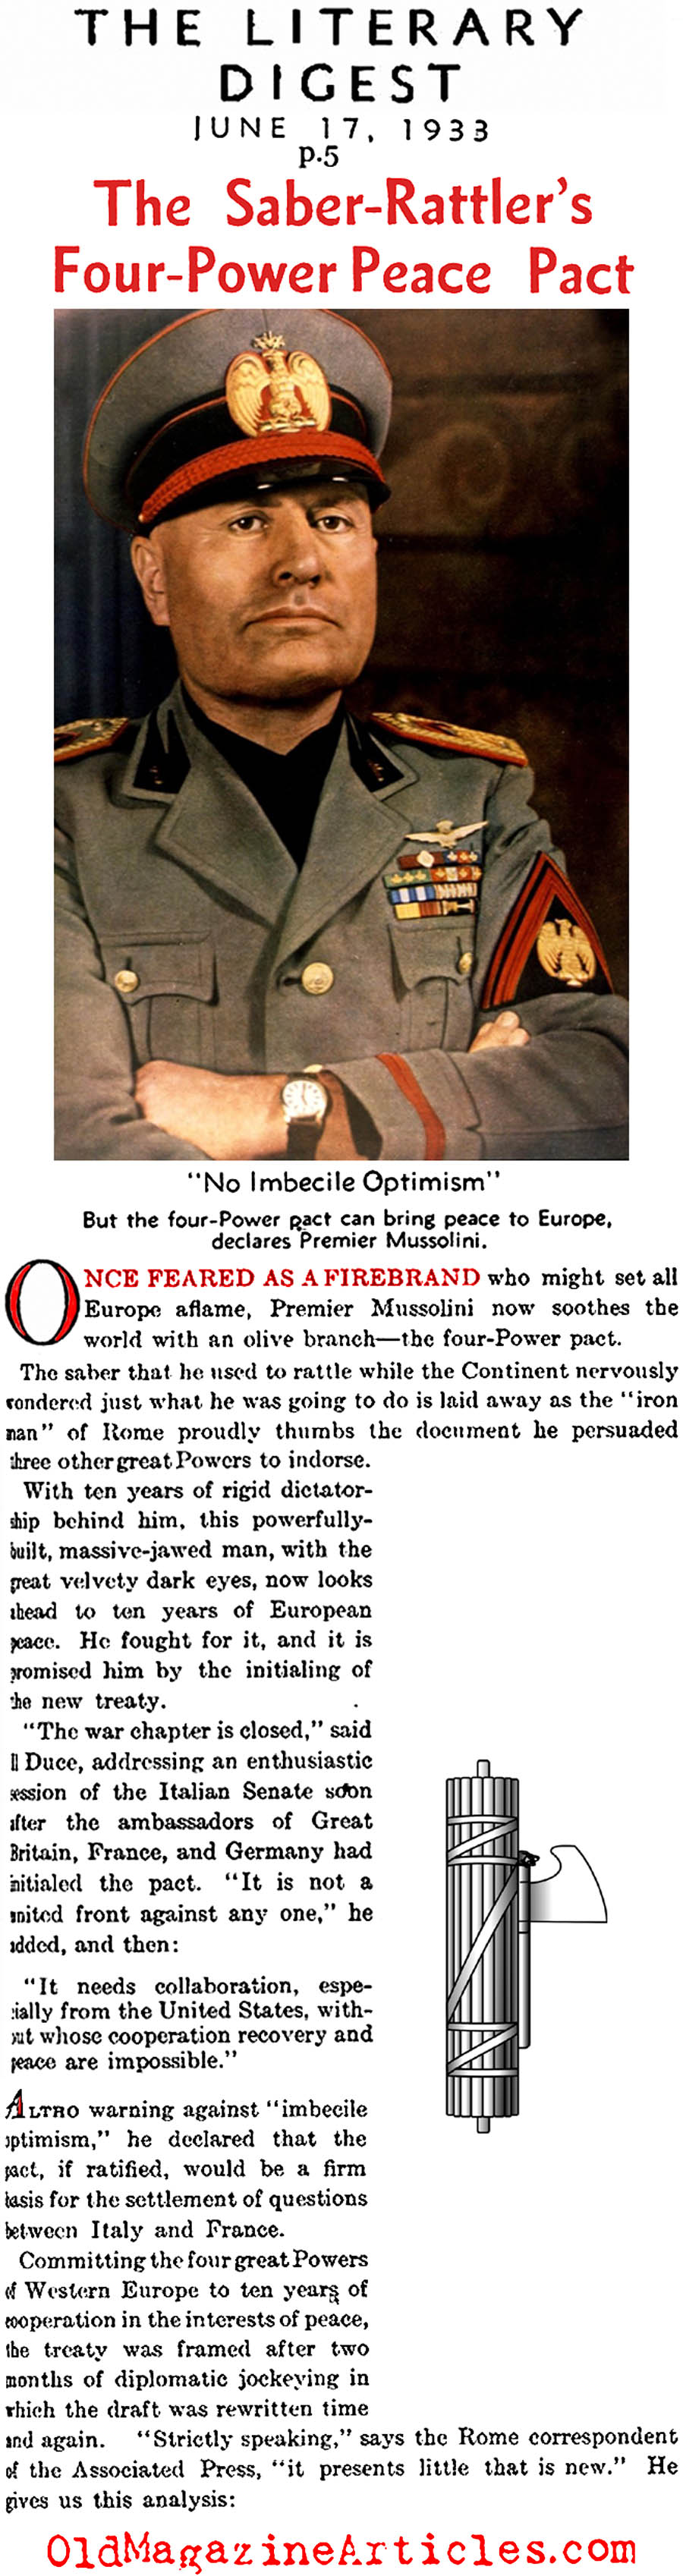 Mussolini and the Four-Power Pact (The Literary Digest, 1933)